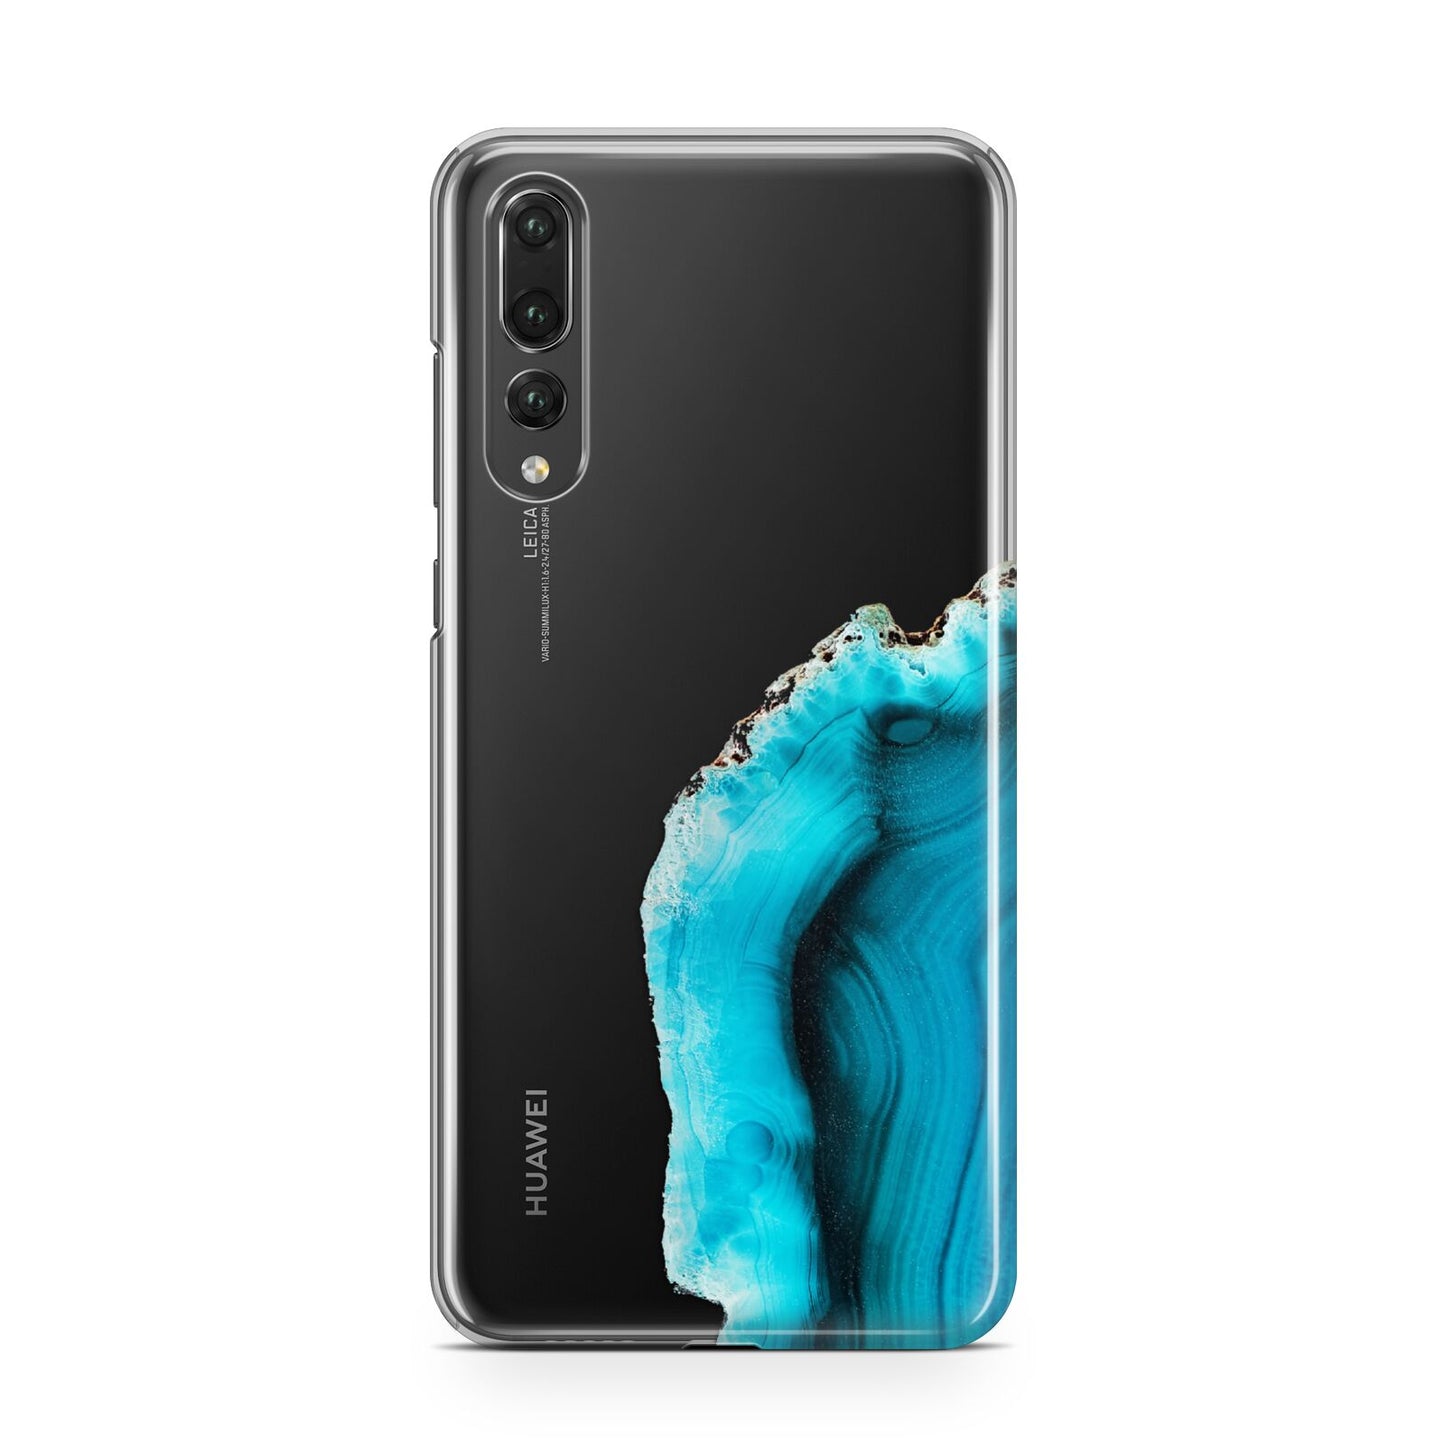 Agate Blue Turquoise Huawei P20 Pro Phone Case